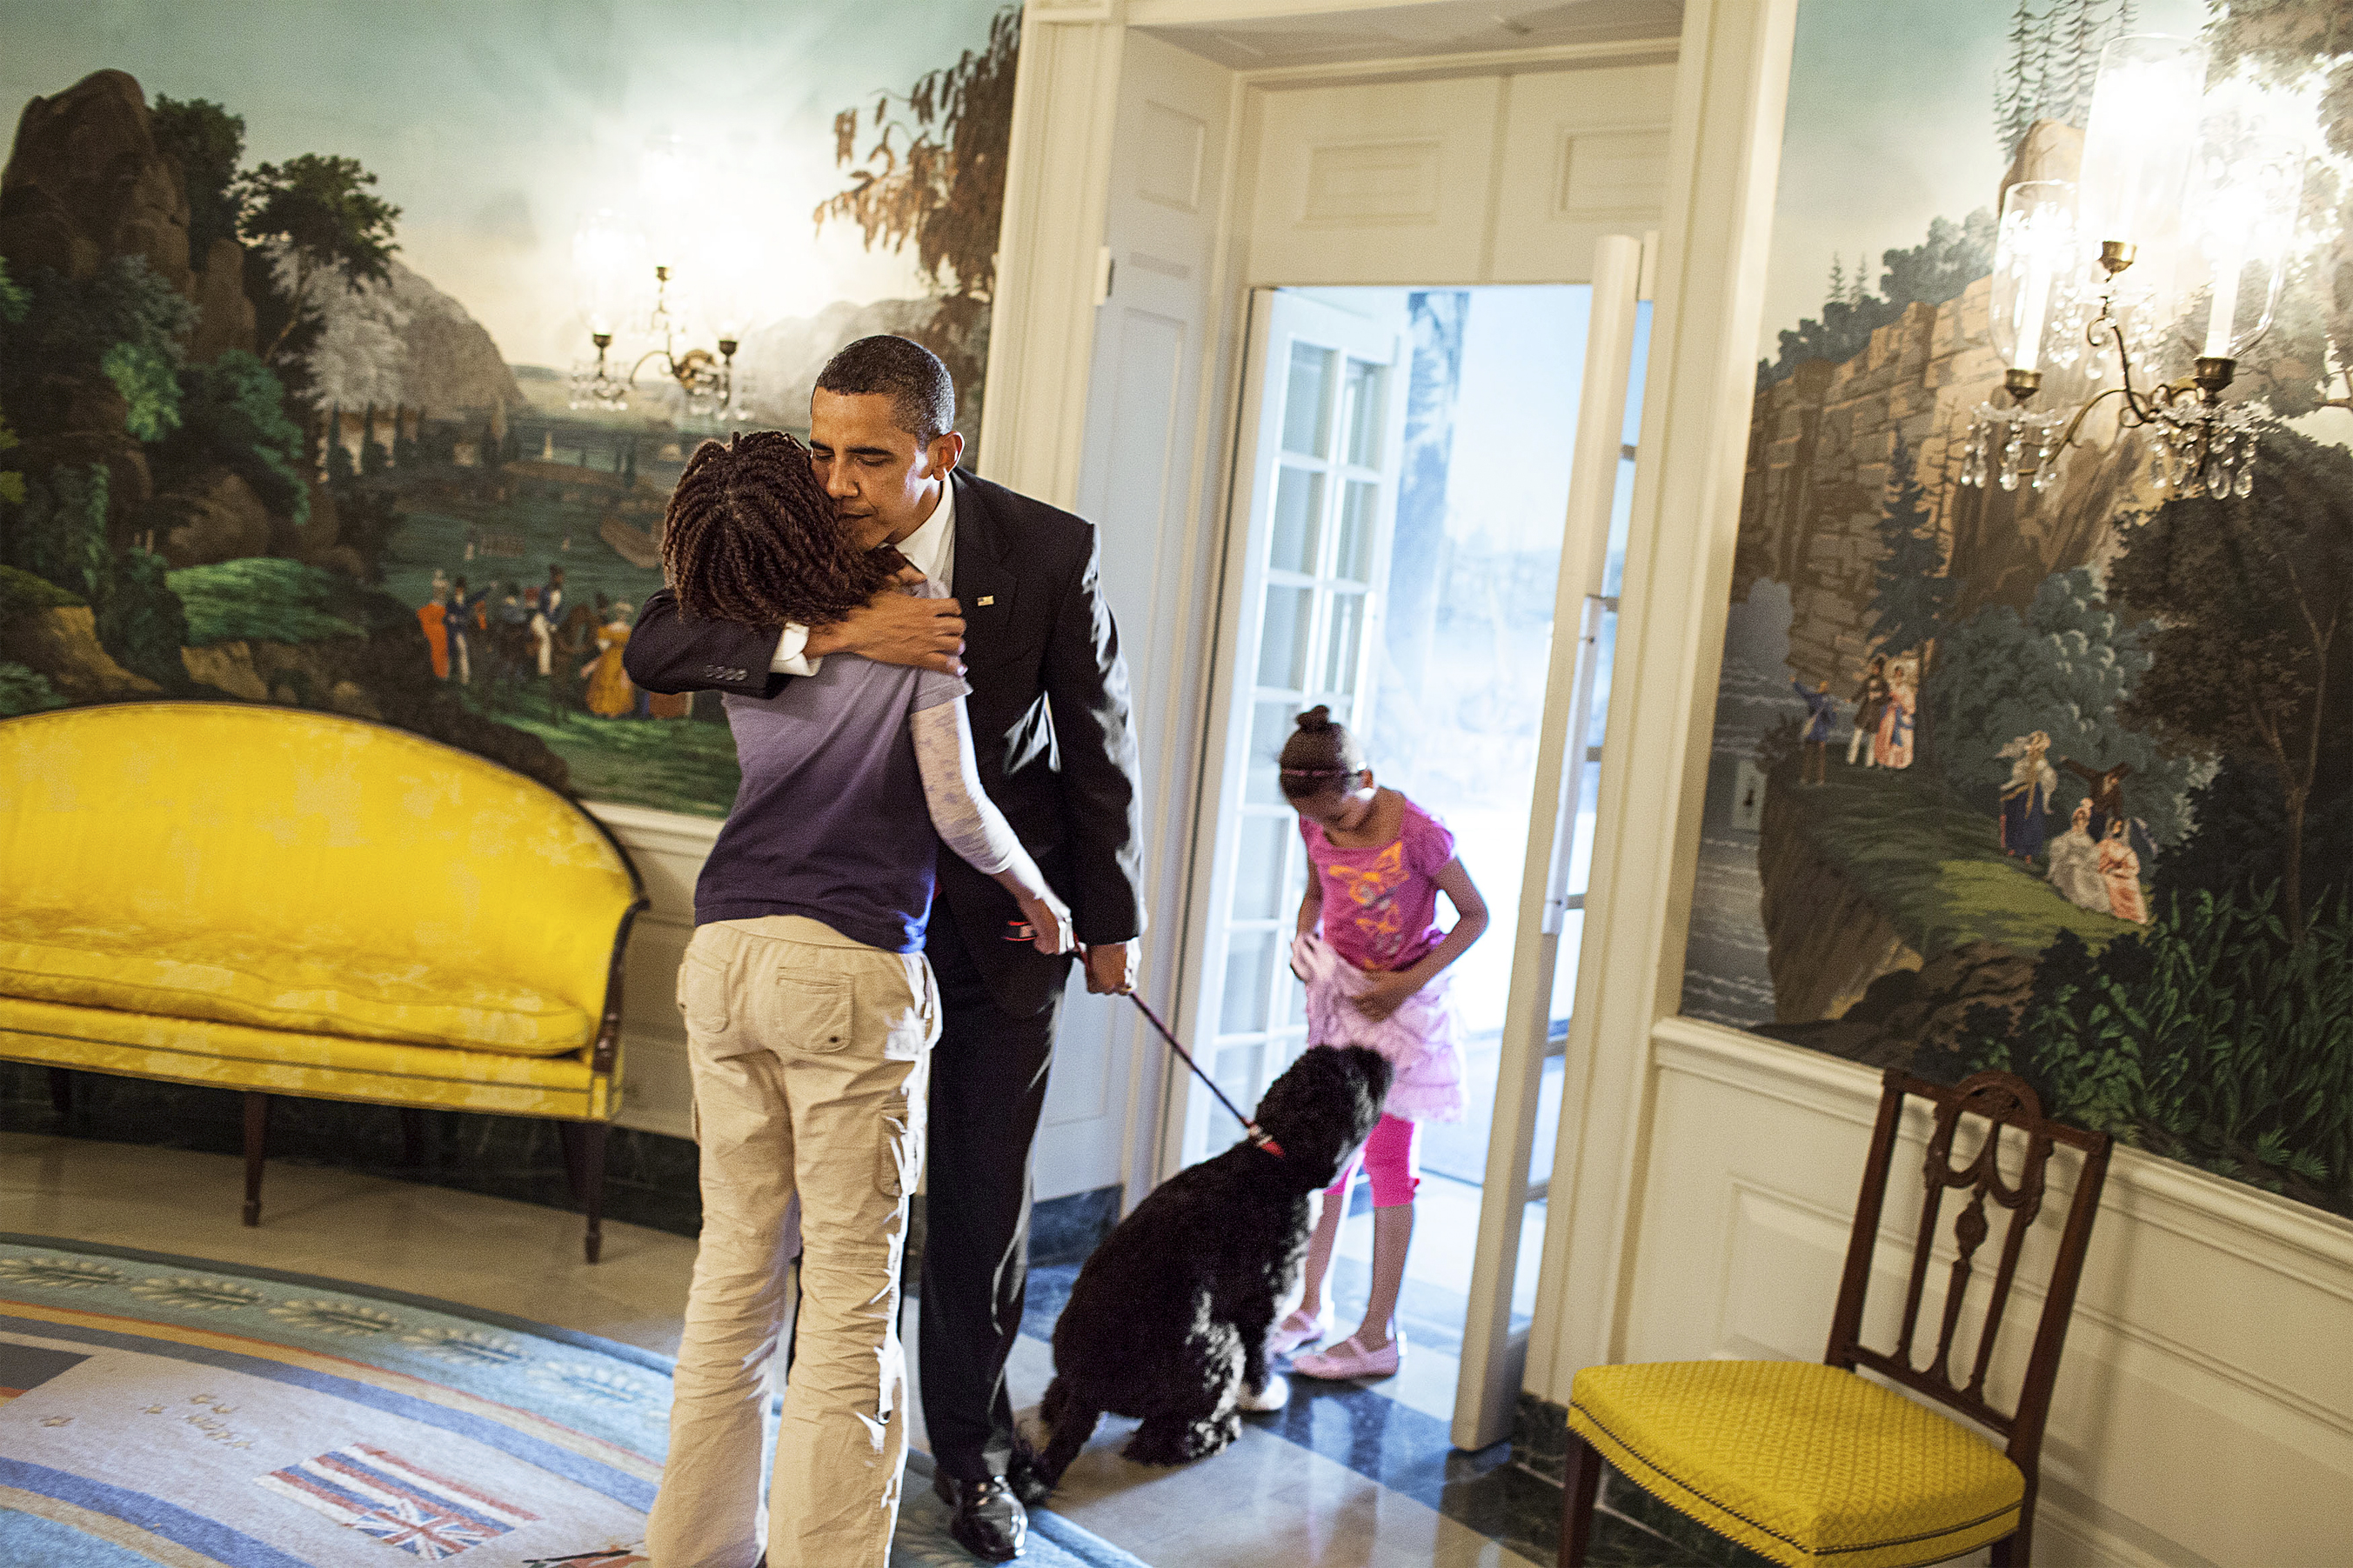 President Barack Obama says goodbye to daughters Sasha and Malia Obama in the Diplomatic Reception Room of the White House before his departure to Arizona, May 13, 209. (Official White House Photo by Samantha Appleton) This photograph is provided by THE WHITE HOUSE as a courtesy and is for one time use only with the MORE Magazine article with First Lady Michelle Obama. This photograph may not be used online or archived. This photograph may not be manipulated in any way and may not otherwise be reproduced, disseminated, or broadcast without the written permission of the White House Photo Office. This photograph may not be used in any commercial or political materials, advertisements, emails, products, promotions that in any way suggests approval or endorsement of the President, the First Family, or the White House.